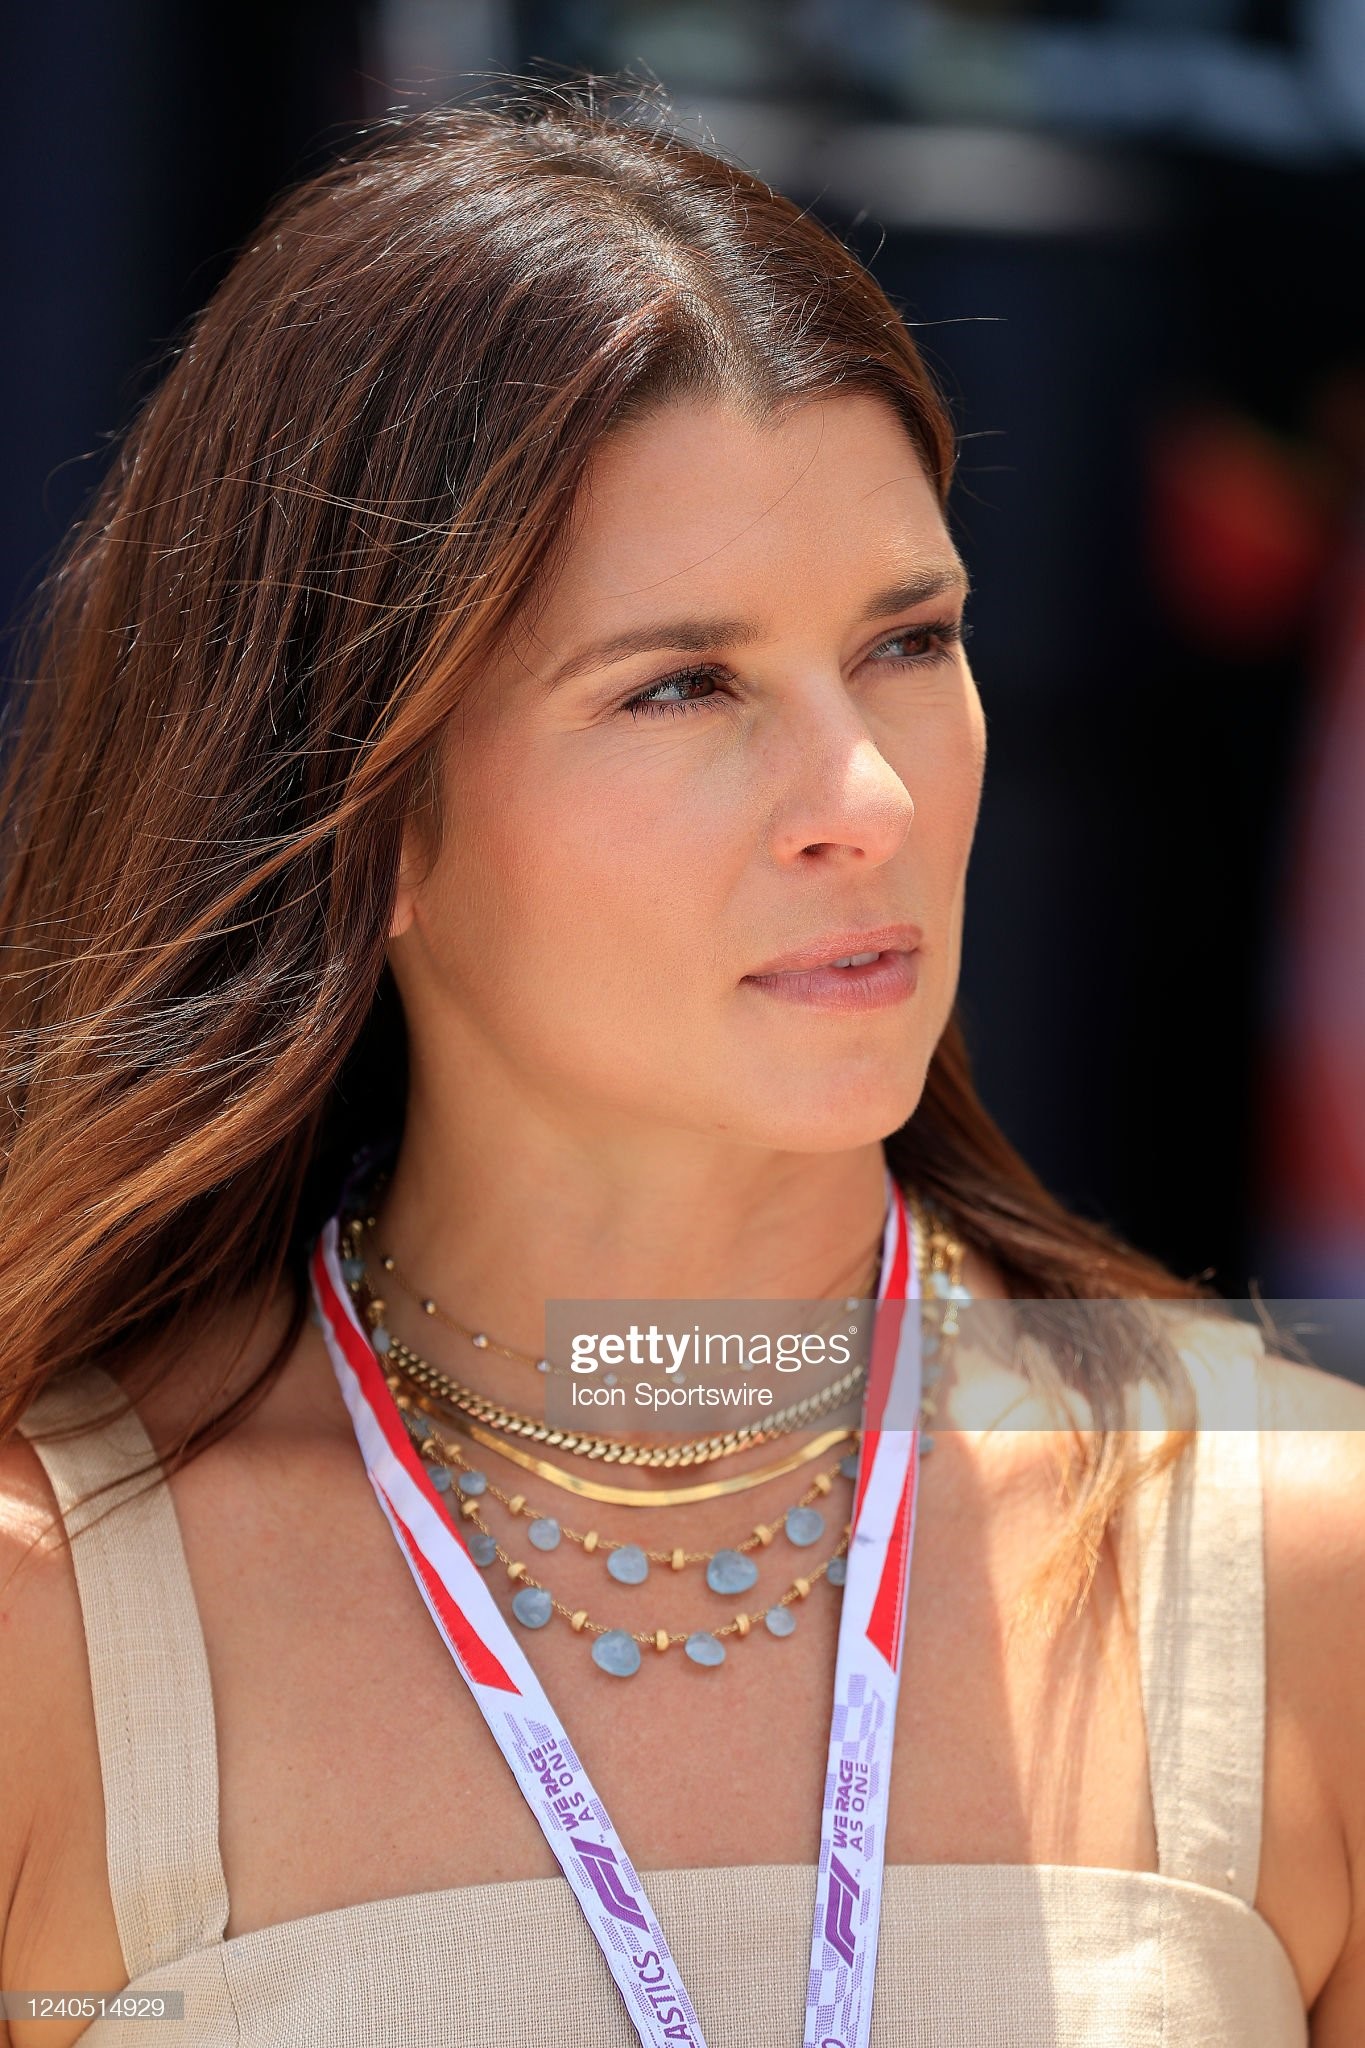 Former Indycar and NASCAR driver Danica Patrick in the paddock prior to 3rd practice for the Miami Grand Prix on May 07, 2022 at the Miami International Autodrome in Miami Gardens, Florida. 